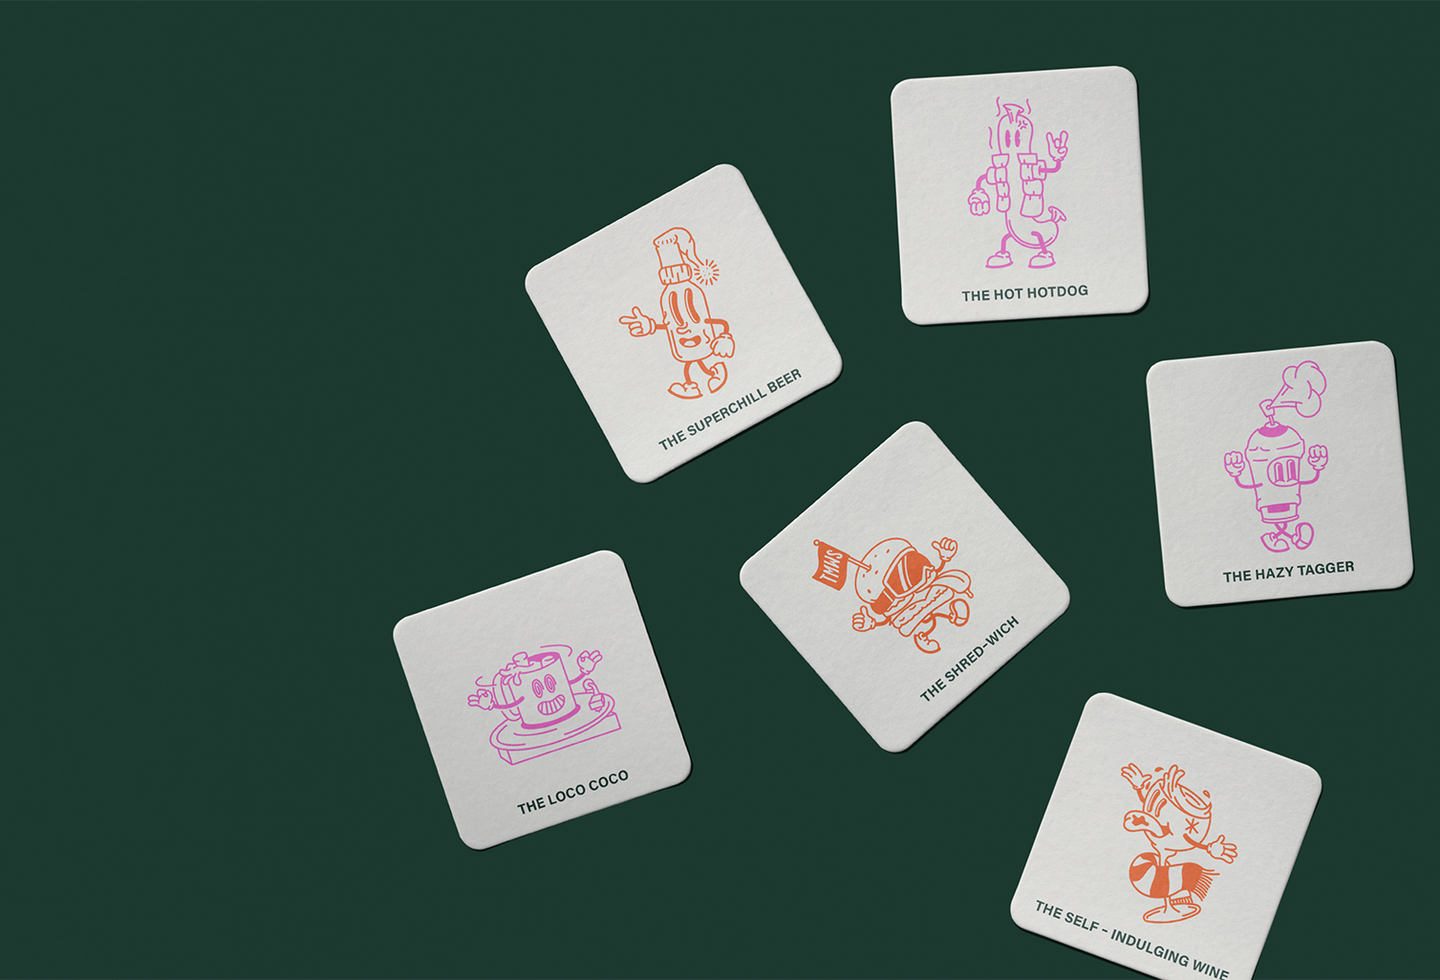 Coasters with the various characters from The Midwinter Session branding